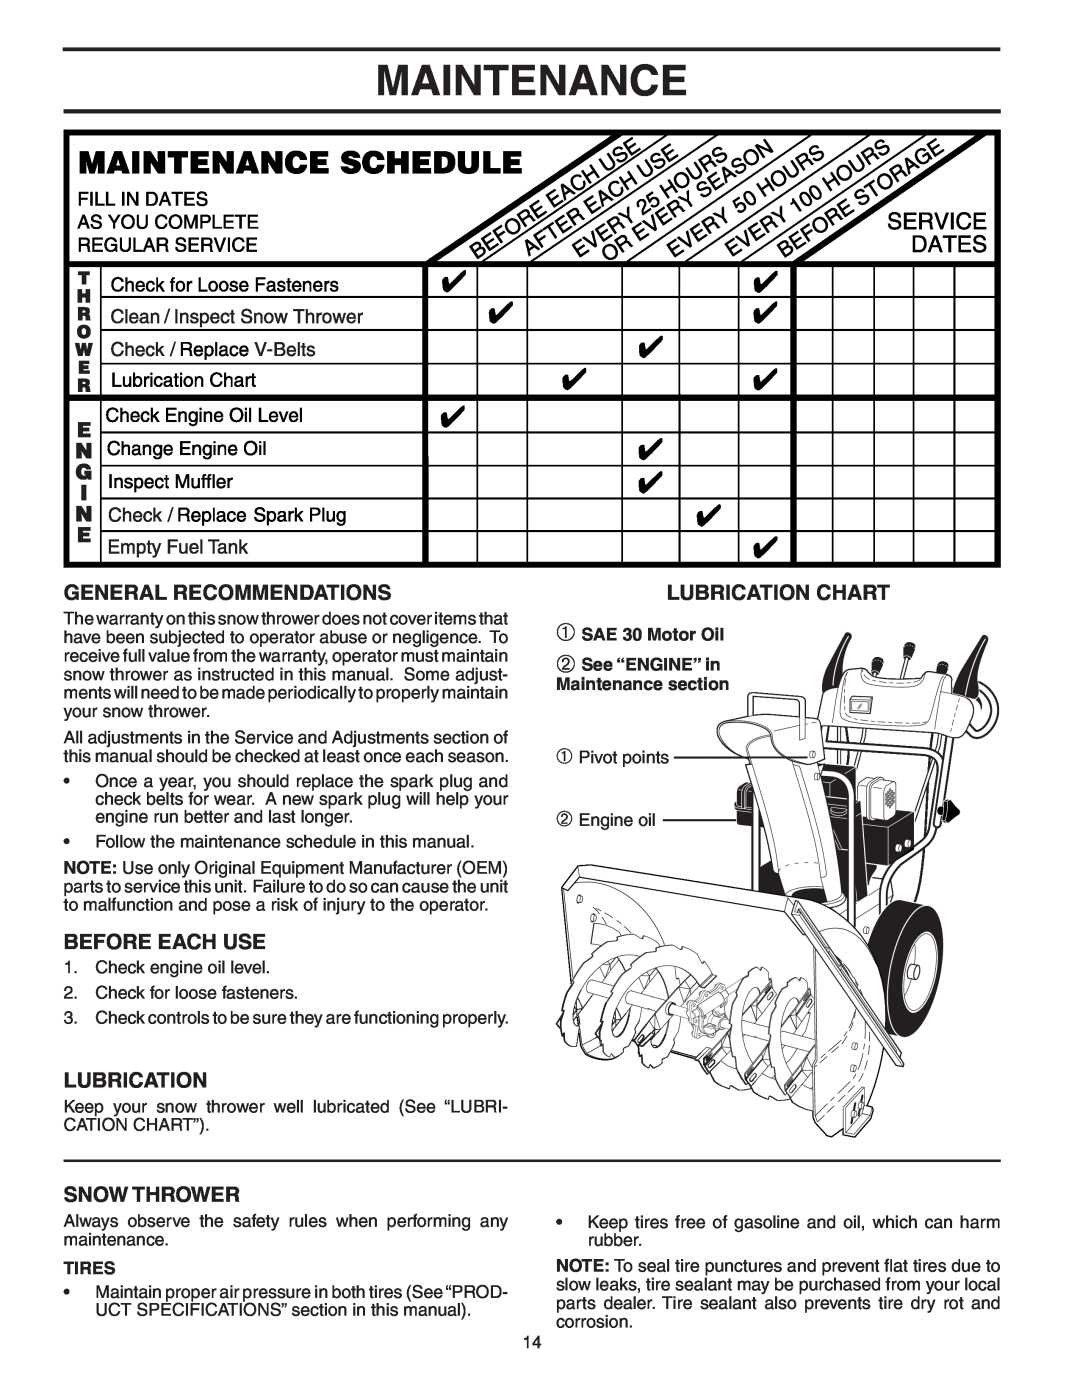 Poulan PP1130ESB Maintenance, General Recommendations, Before Each Use, Snow Thrower, Lubrication Chart, Tires 